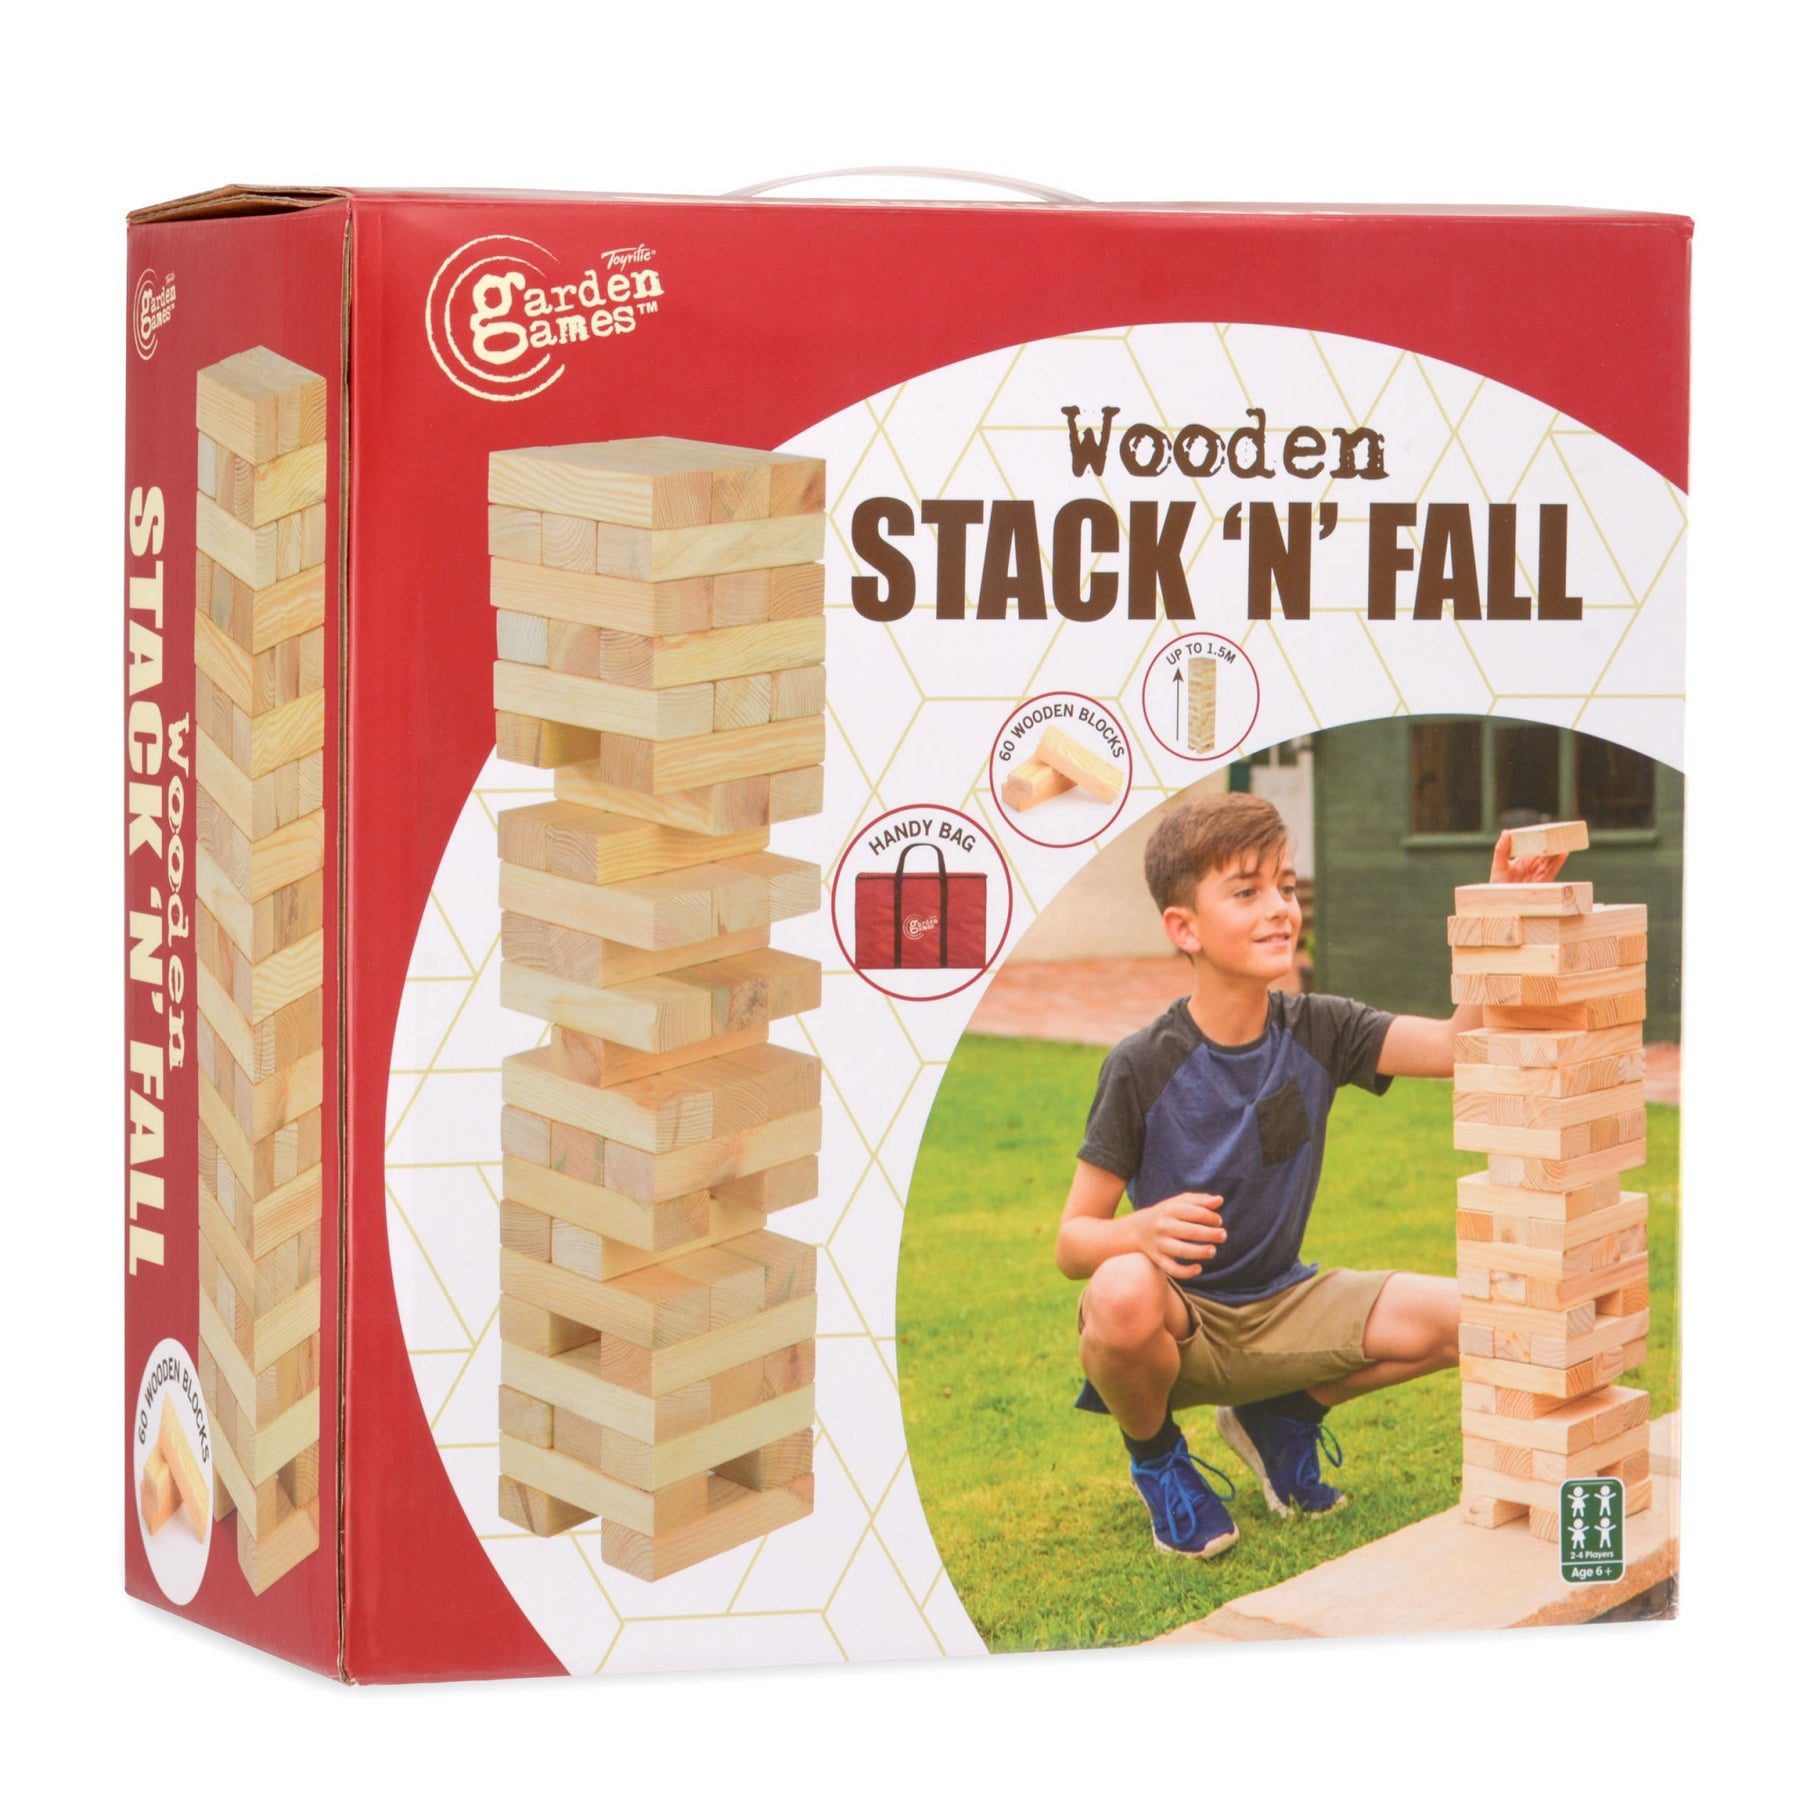 Garden Games Wooden Giant Stack n Fall